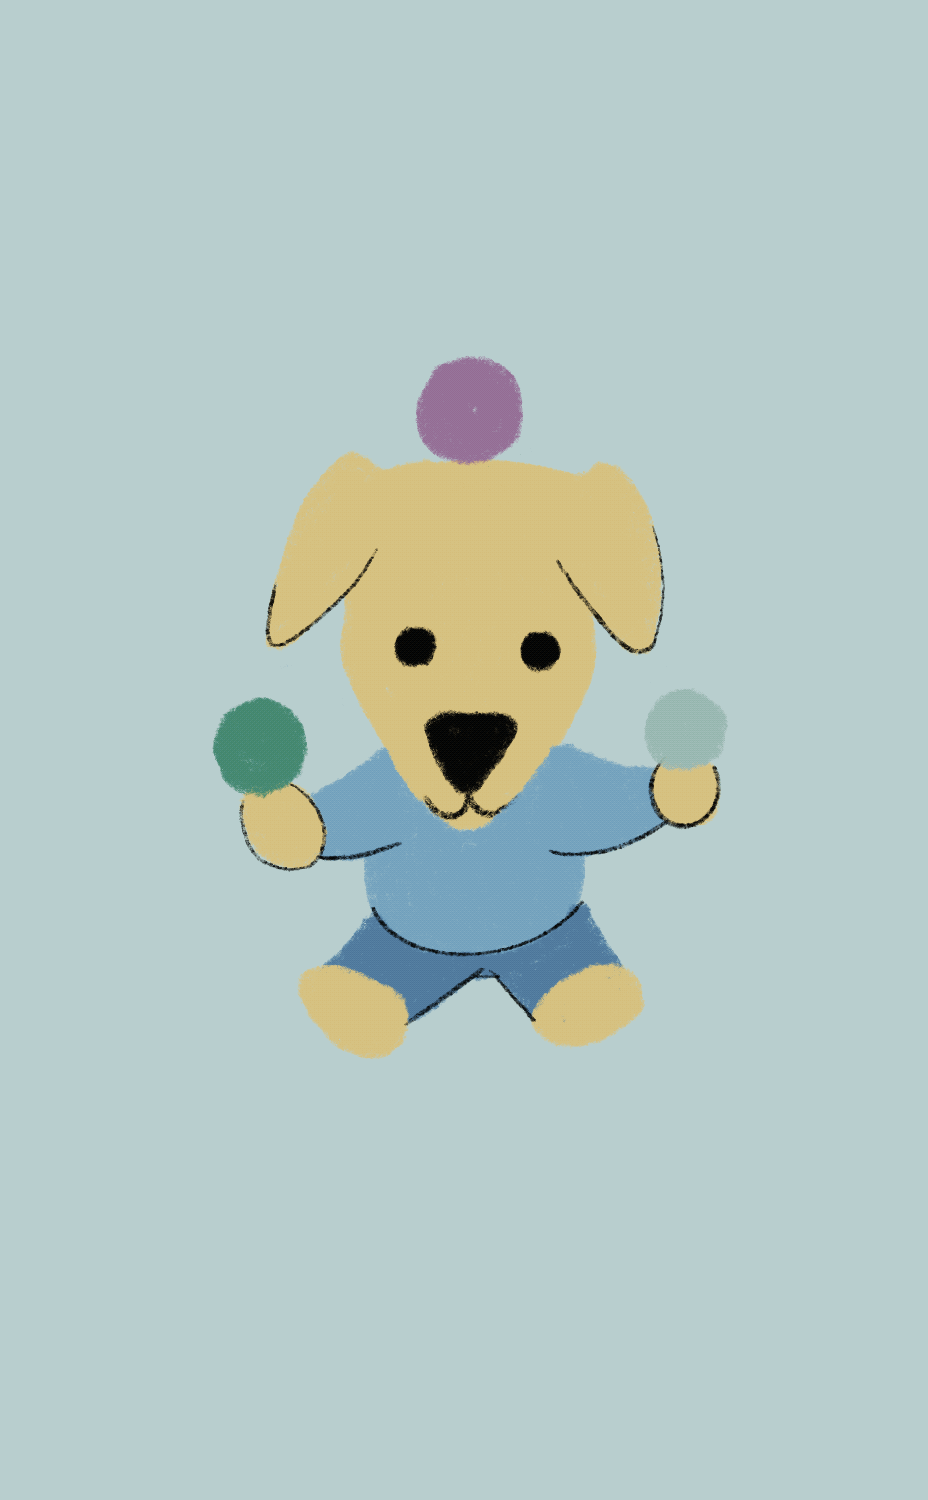 Yellow dog juggling three balls in the air